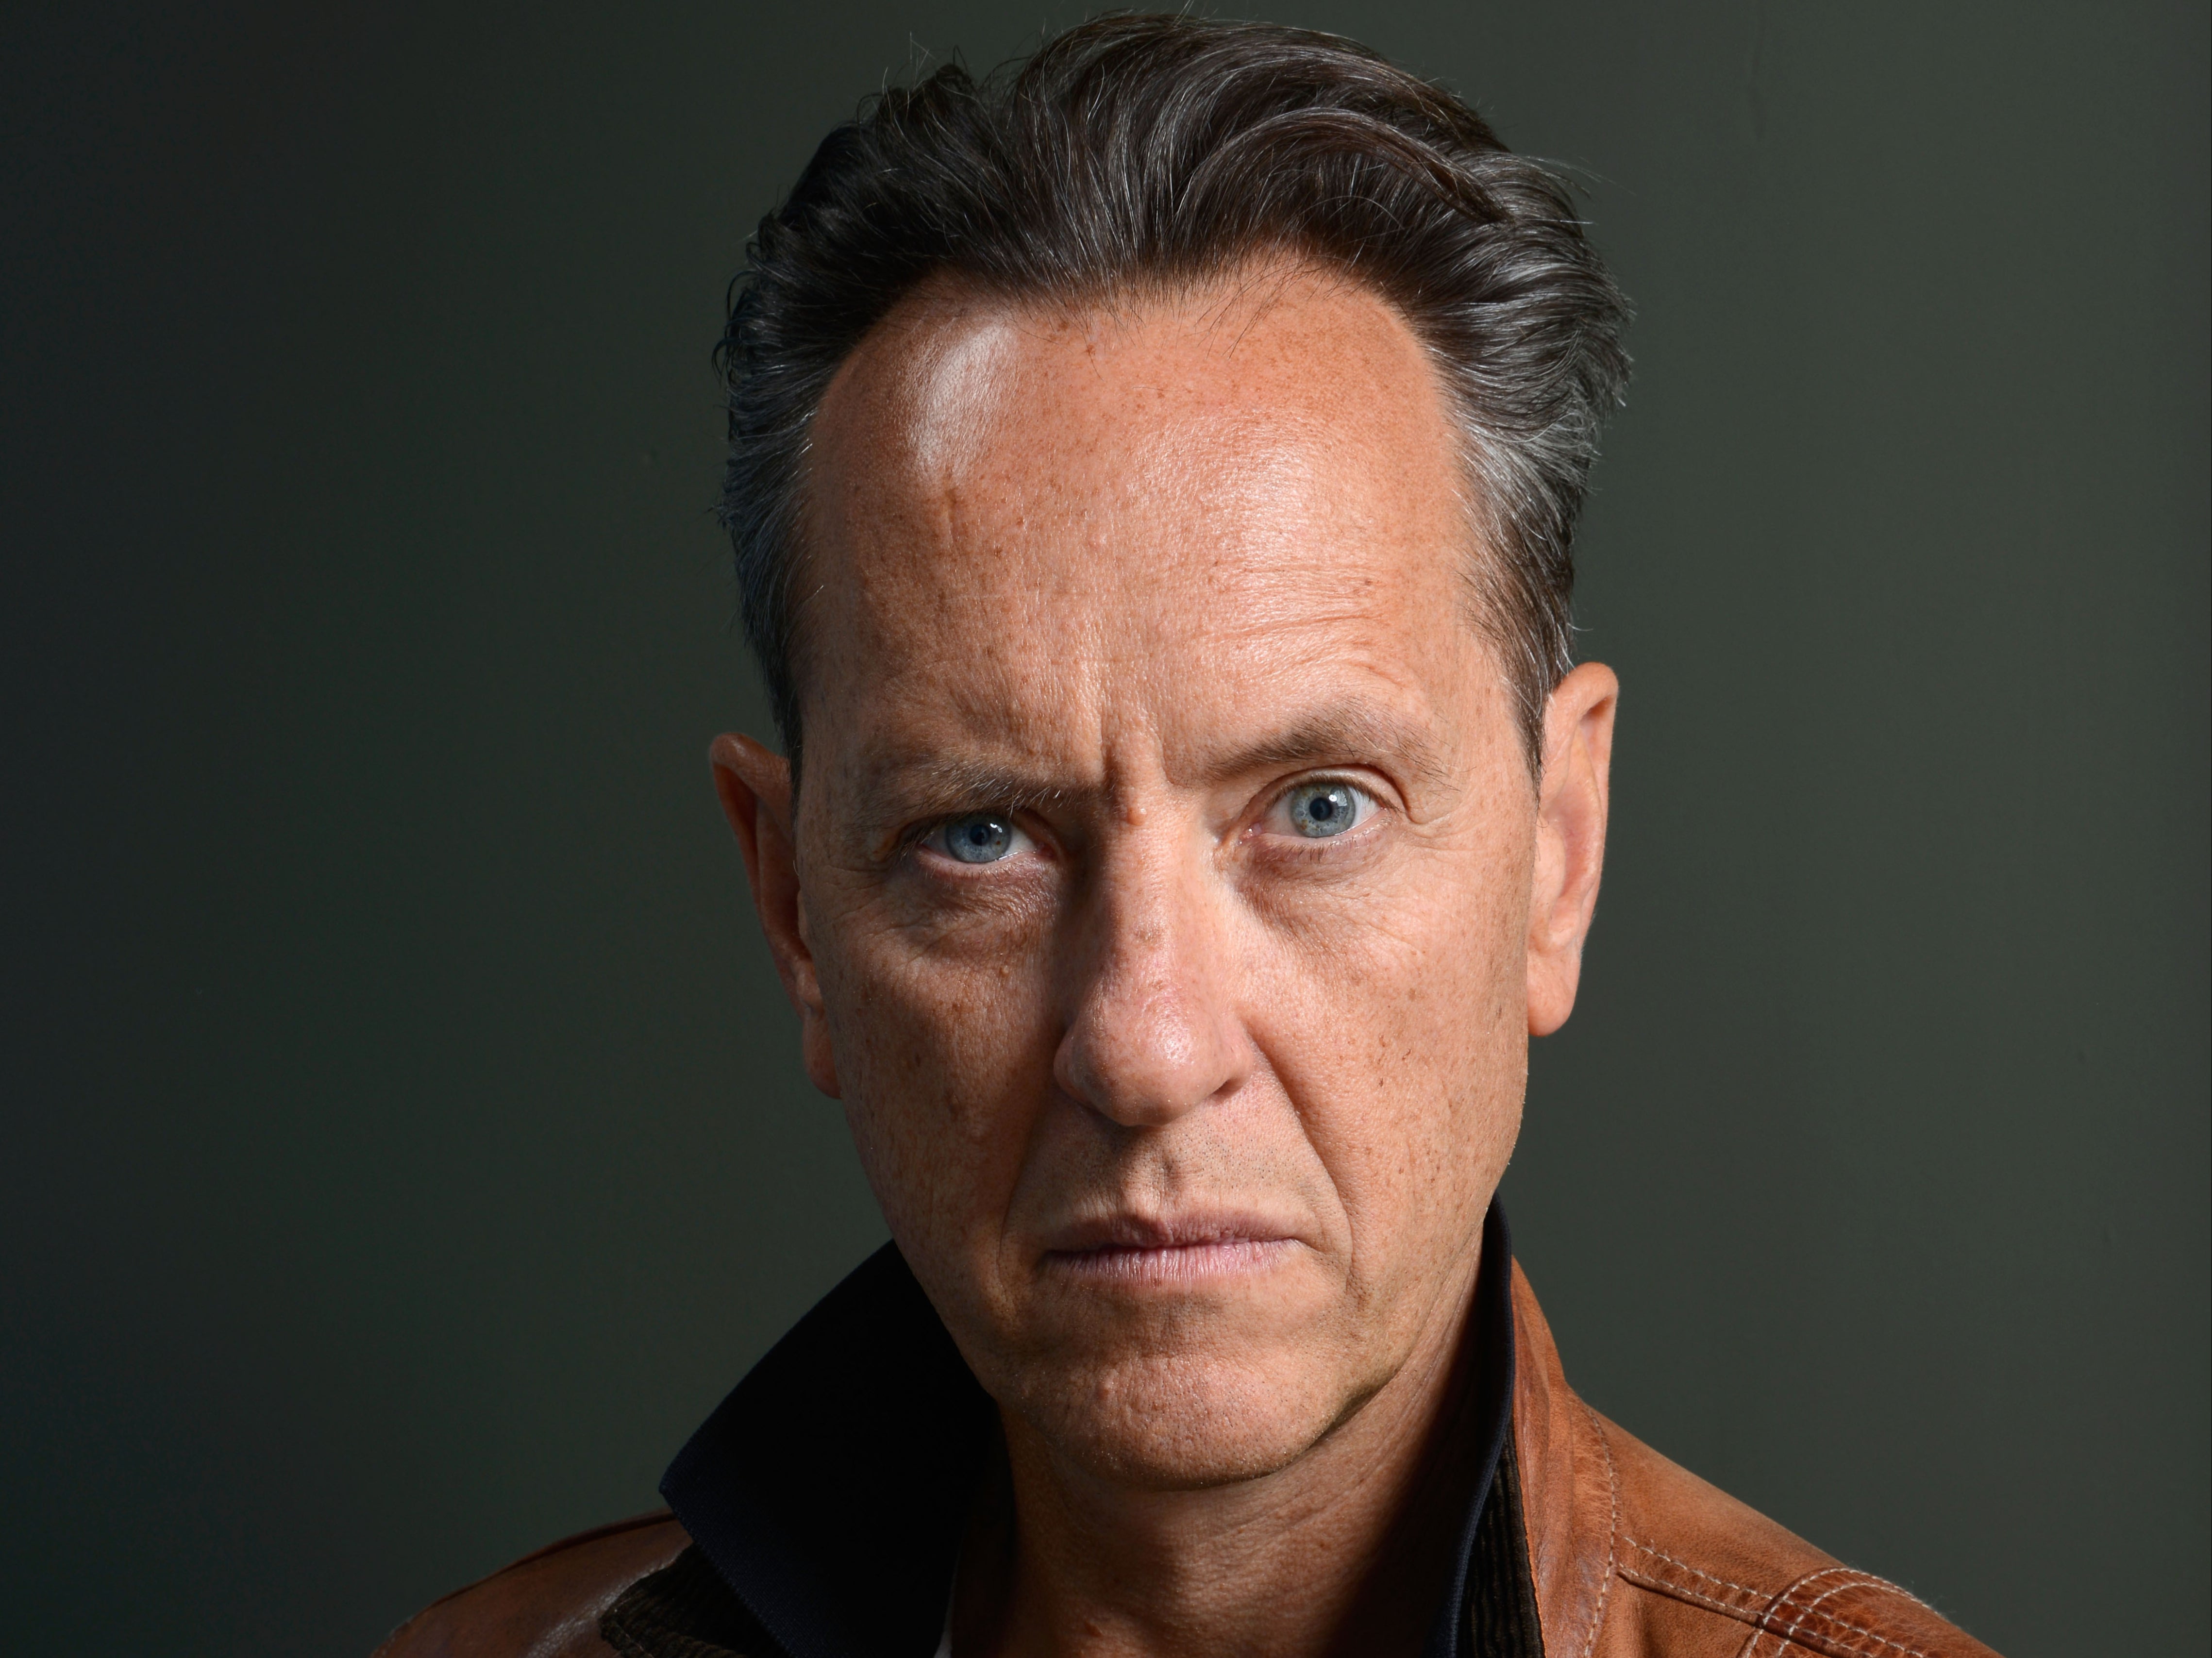 Richard E Grant: ‘After 38 years together I know I can anticipate what her response would be’